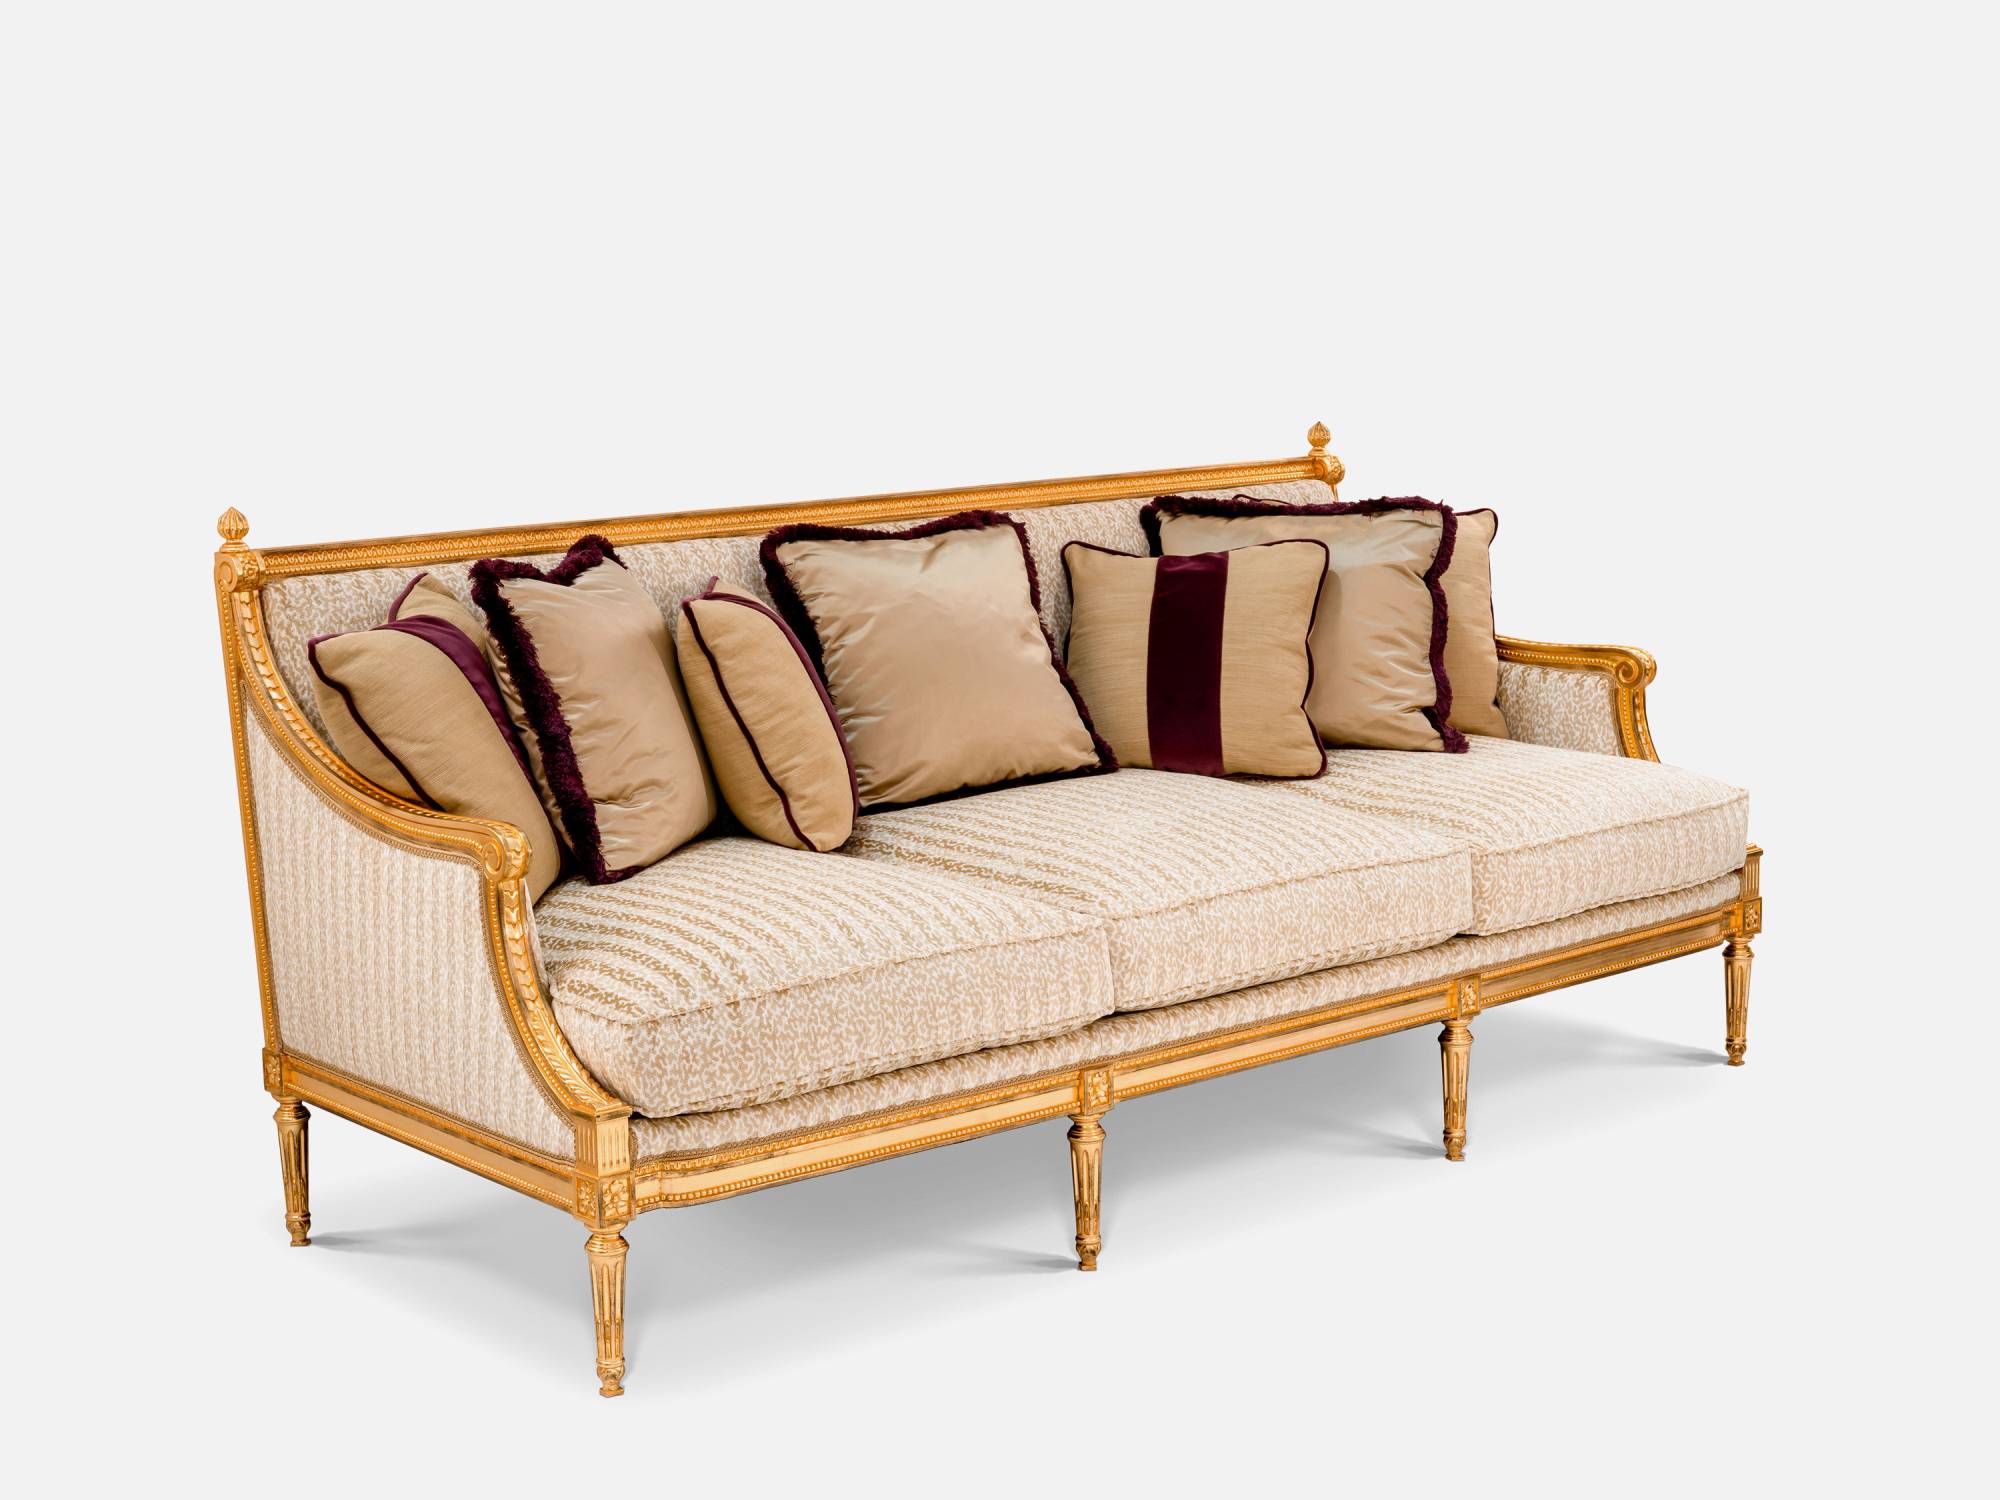 ART. 2304 – The elegance of luxury classic Sofas made in Italy by C.G. Capelletti.